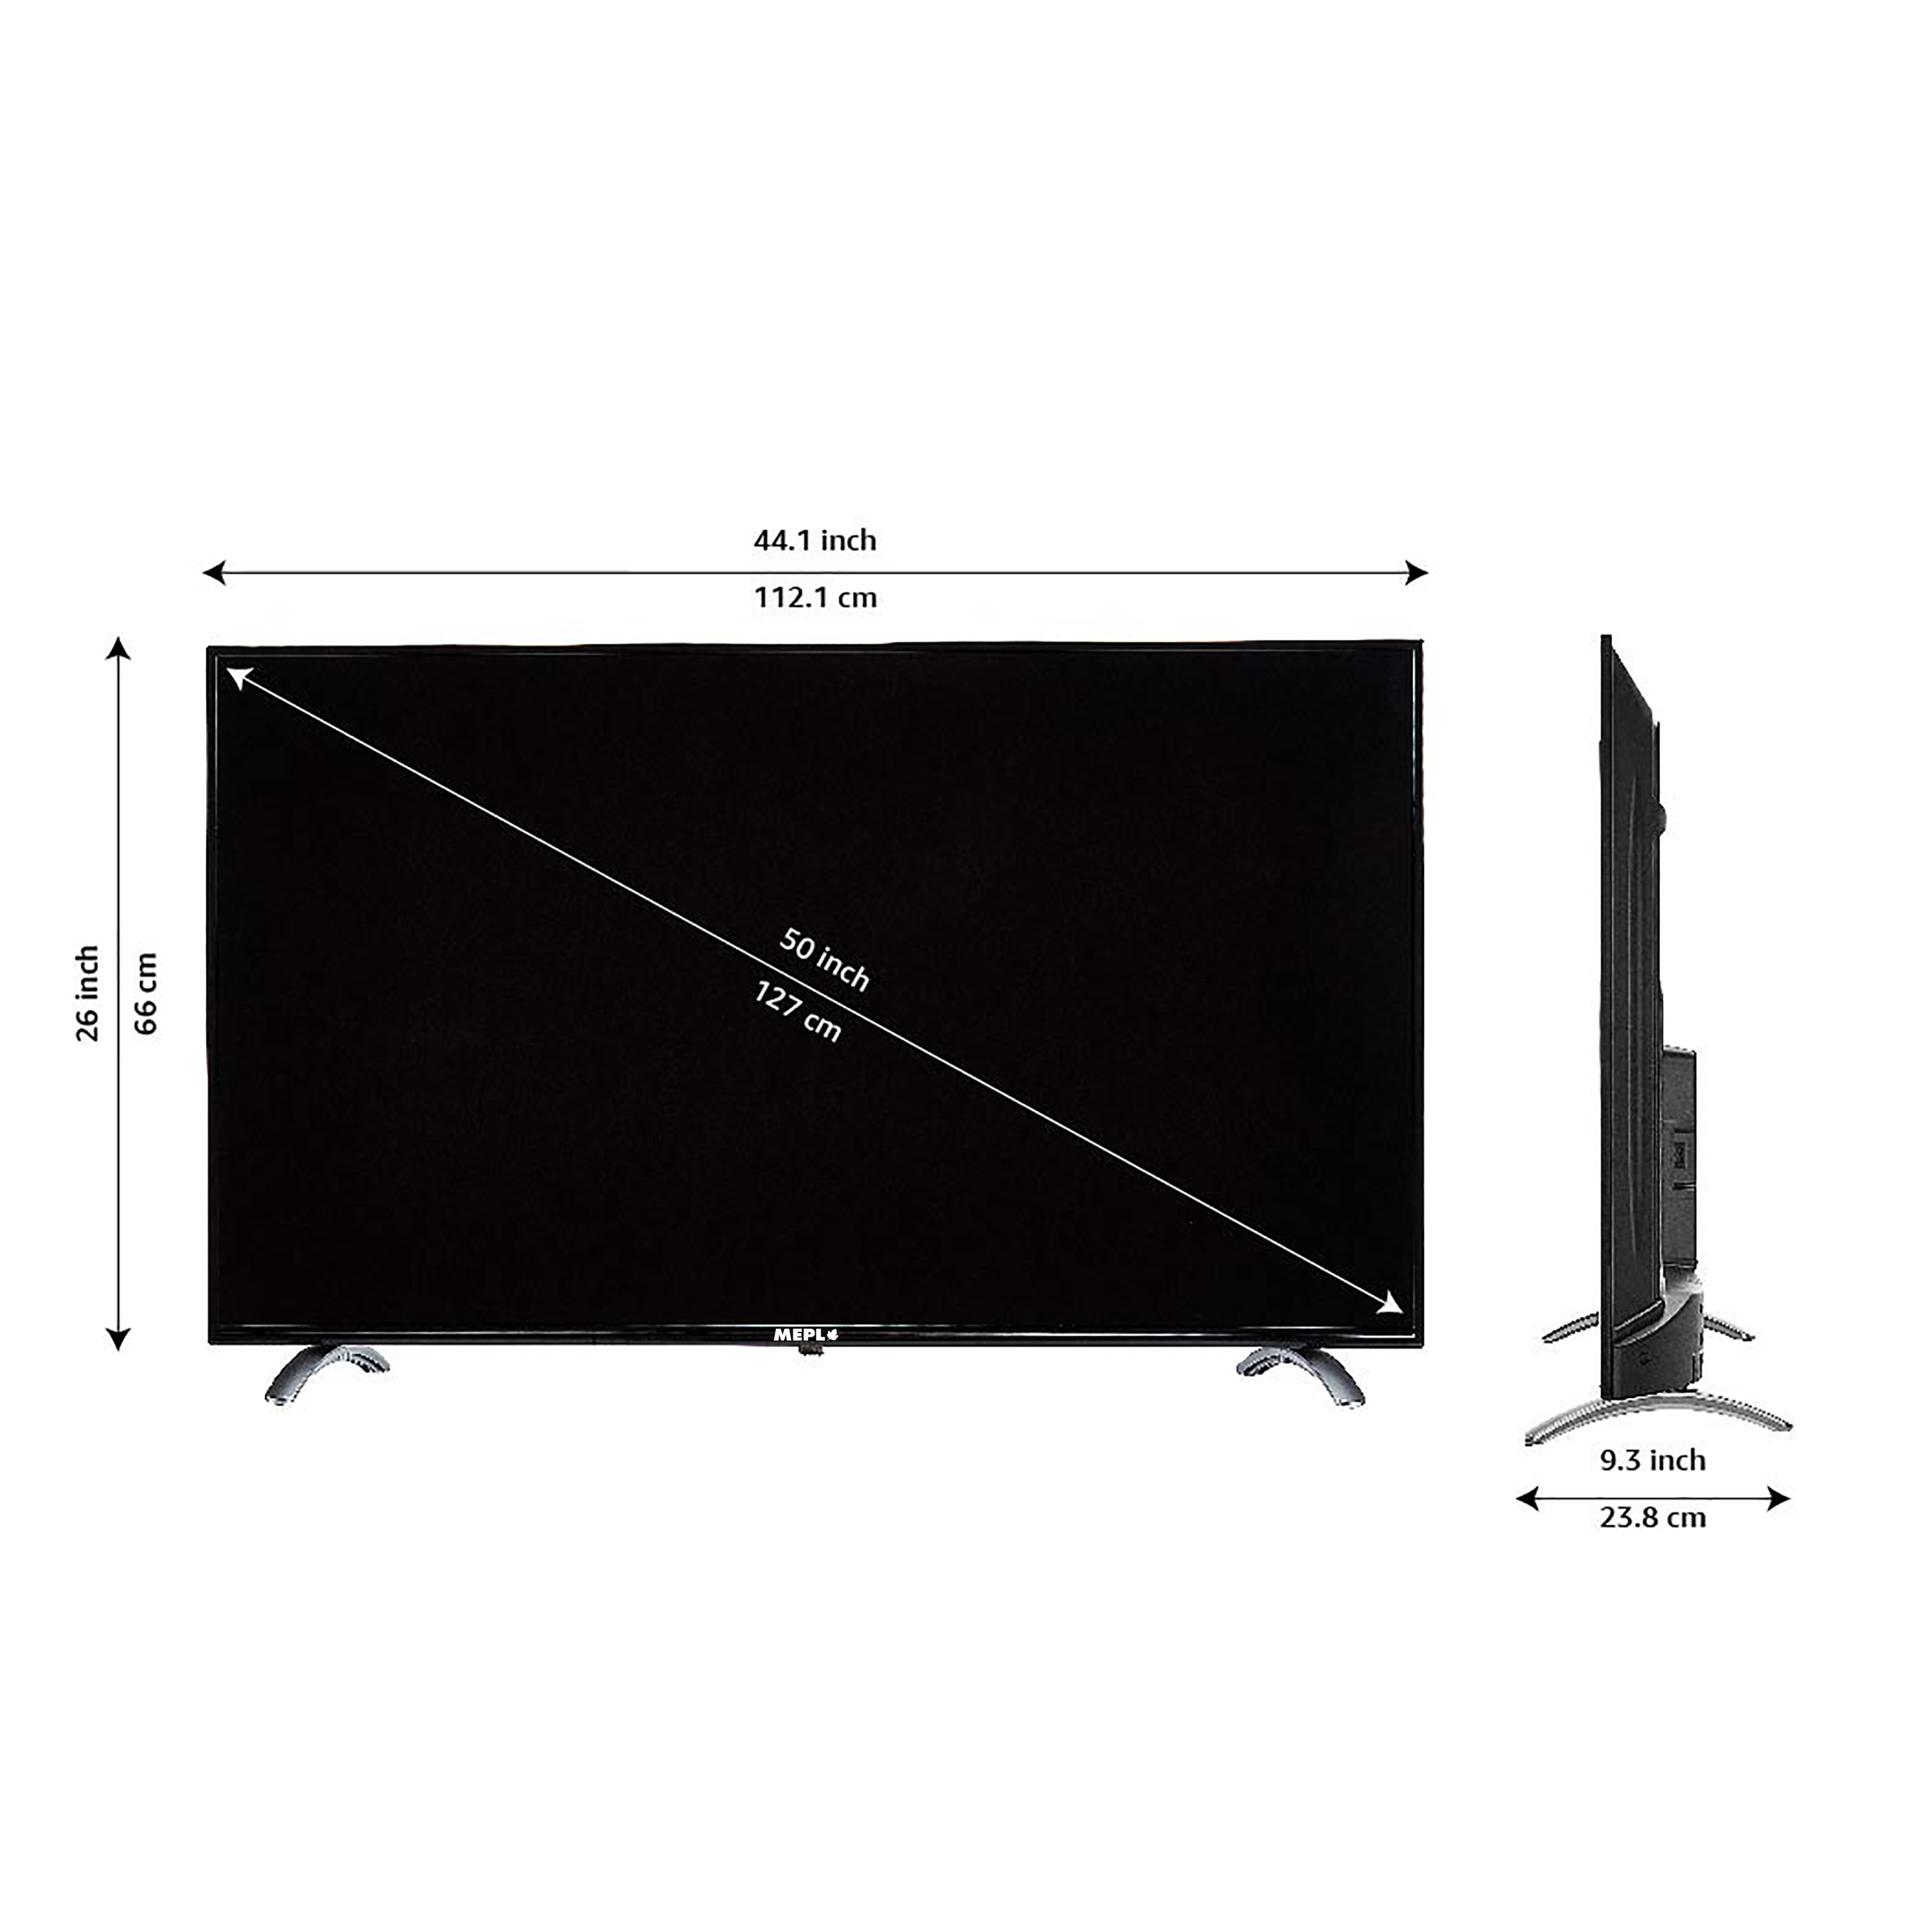 MEPL 4K UHD Smart LED TV With Ai 50inch